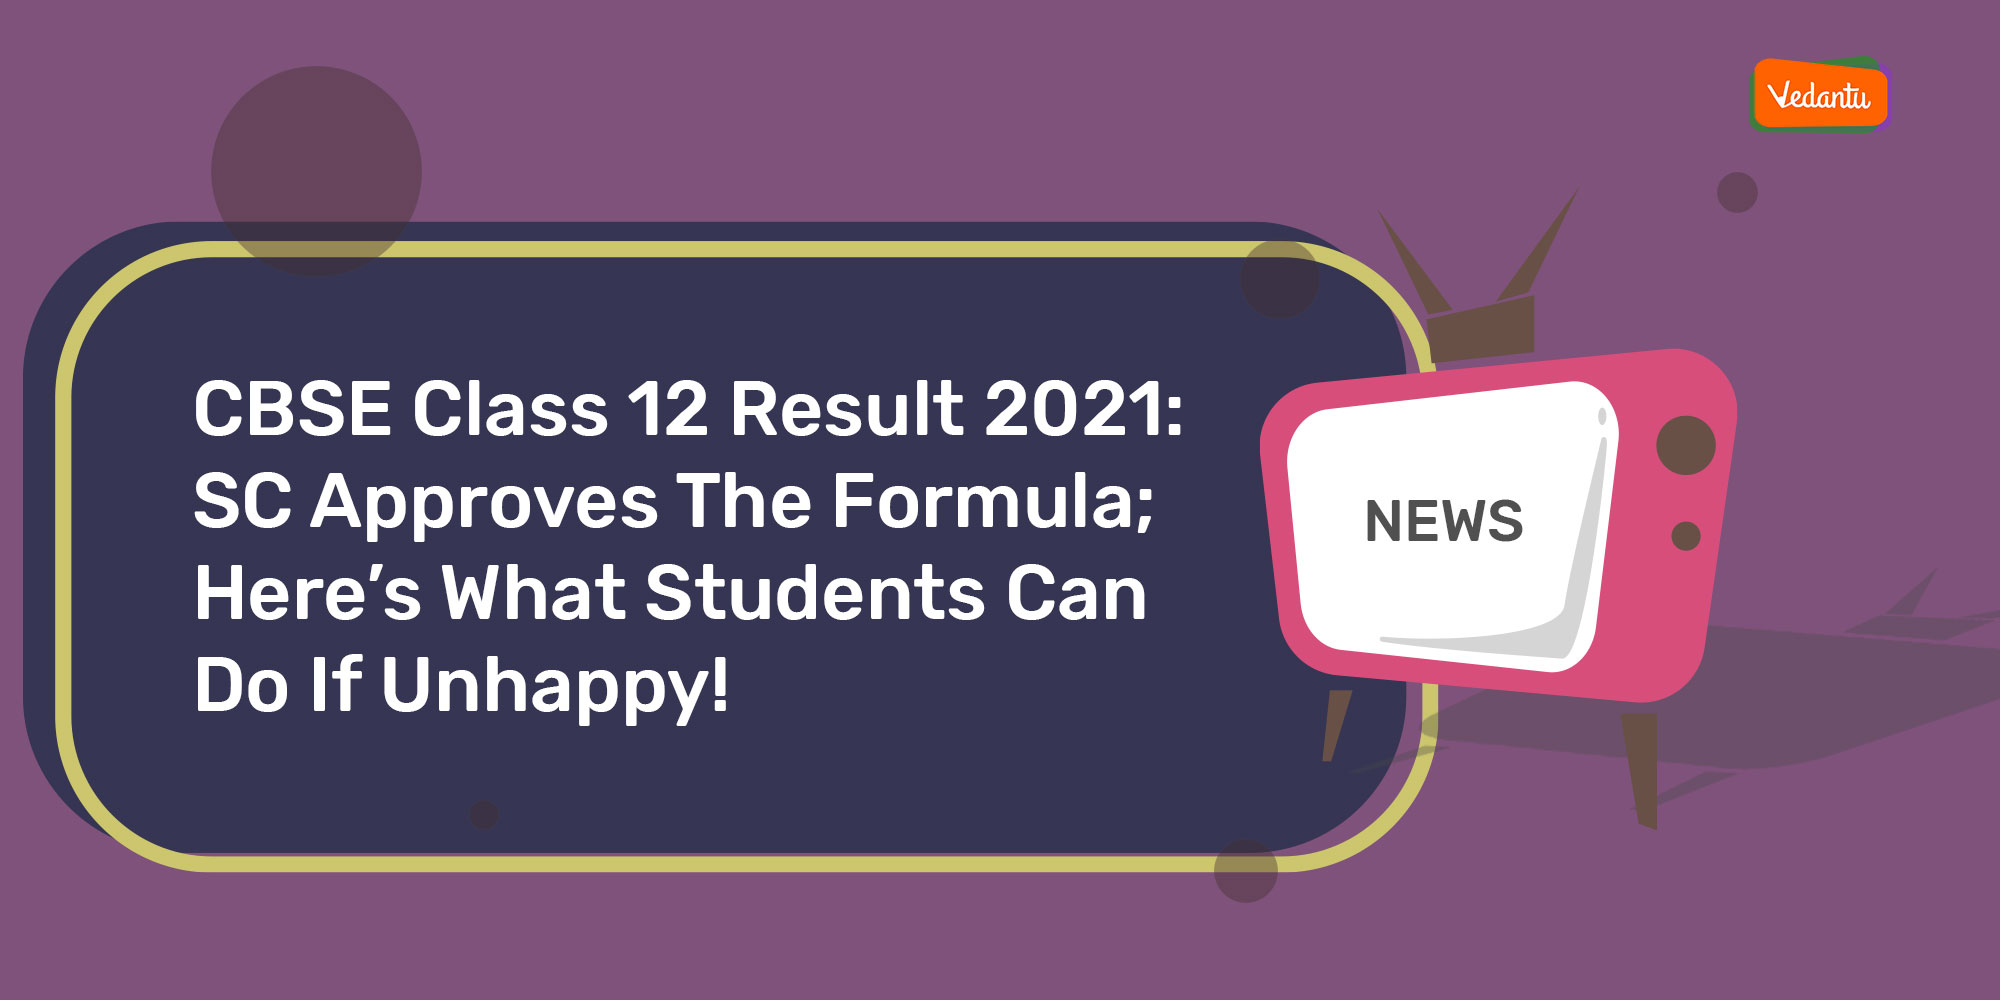 CBSE Class 12 Result 2021: SC Approves The Formula; Here’s What Students Can Do If Unhappy!